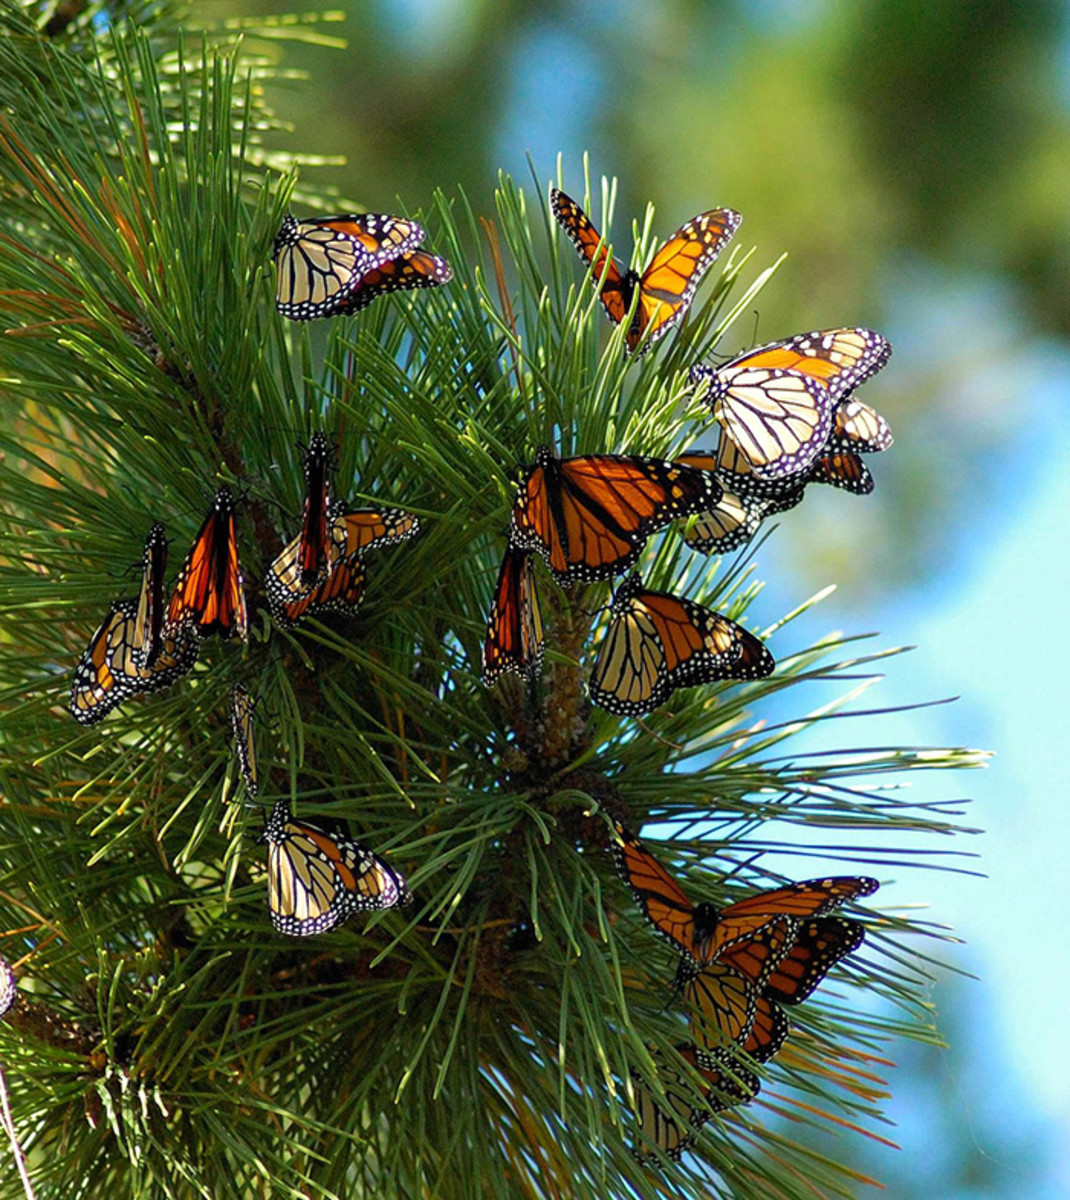 Monarchs travel alone, but they rest together overnight, typically roosting in evergreen conifers.